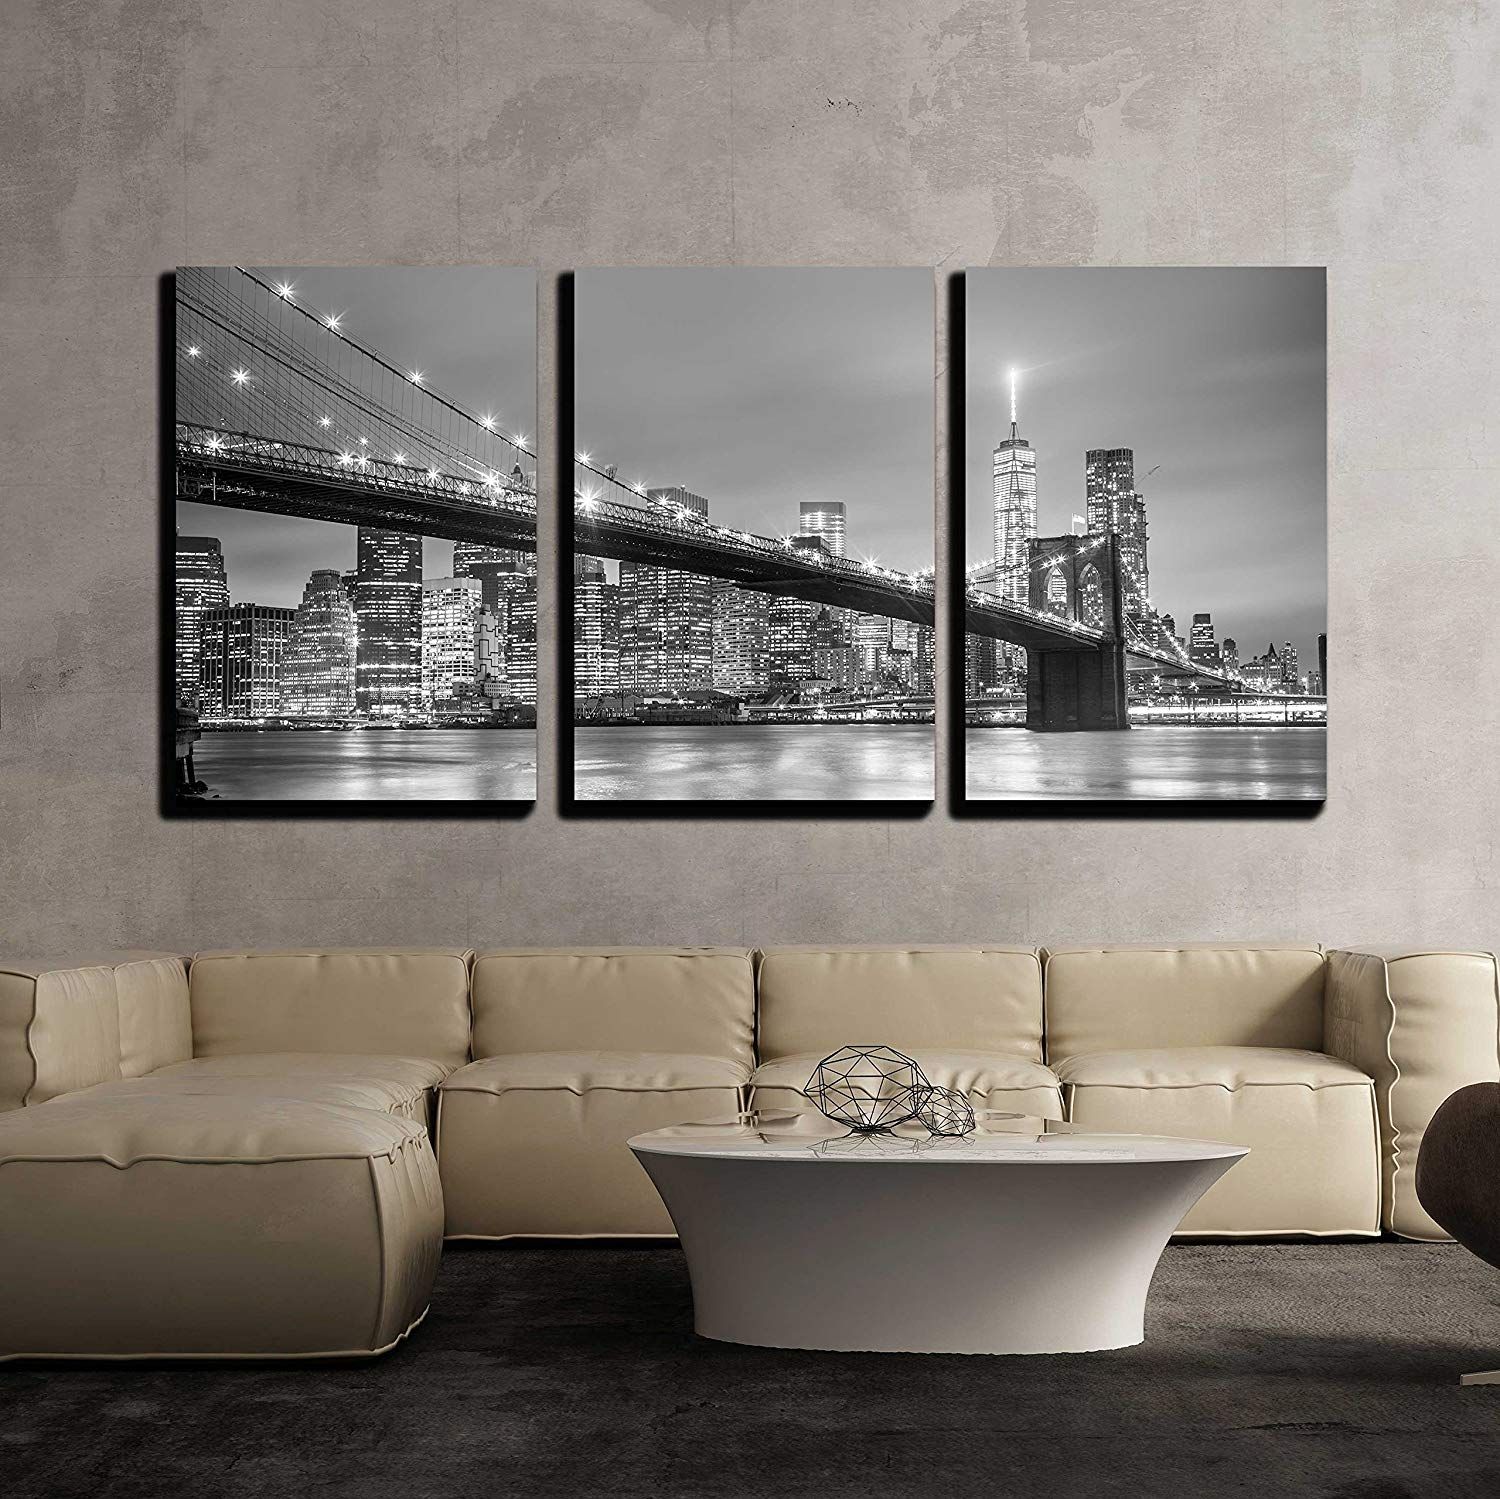 Wall26 3 Panels Canvas Art Black And White City Landscape Prints Modern Wall  Art Decor, 24 X 36 Inch – Walmart Pertaining To Town Wall Art (View 15 of 15)